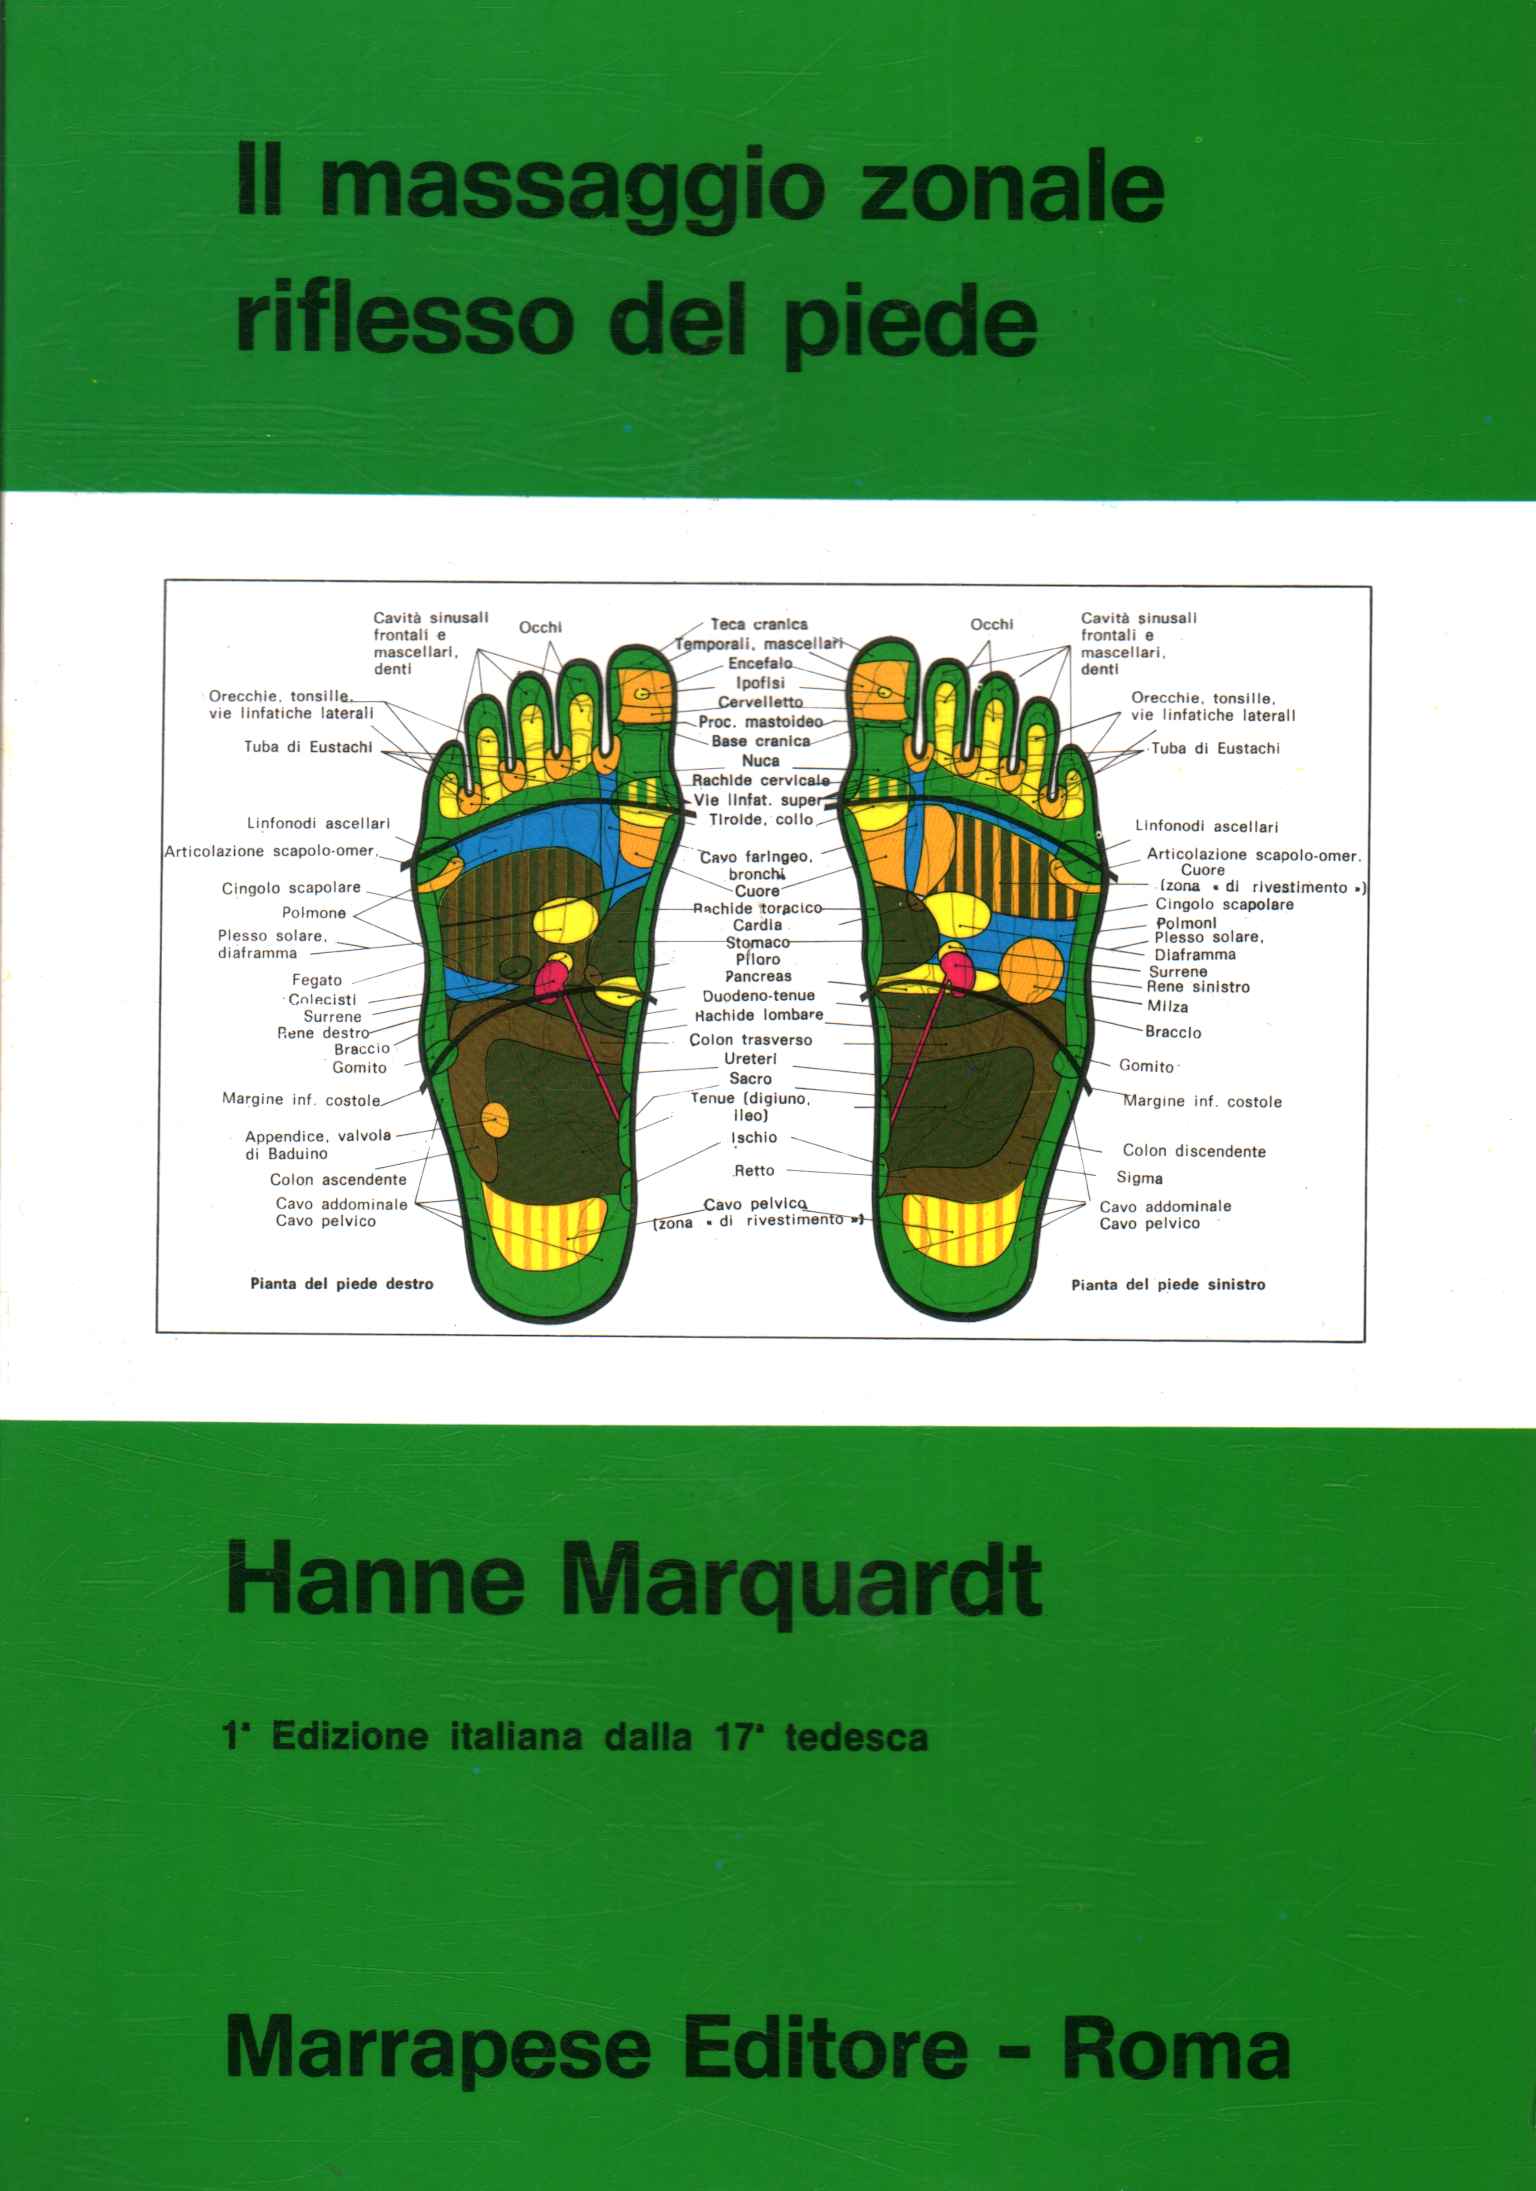 The reflex zonal massage of the foot